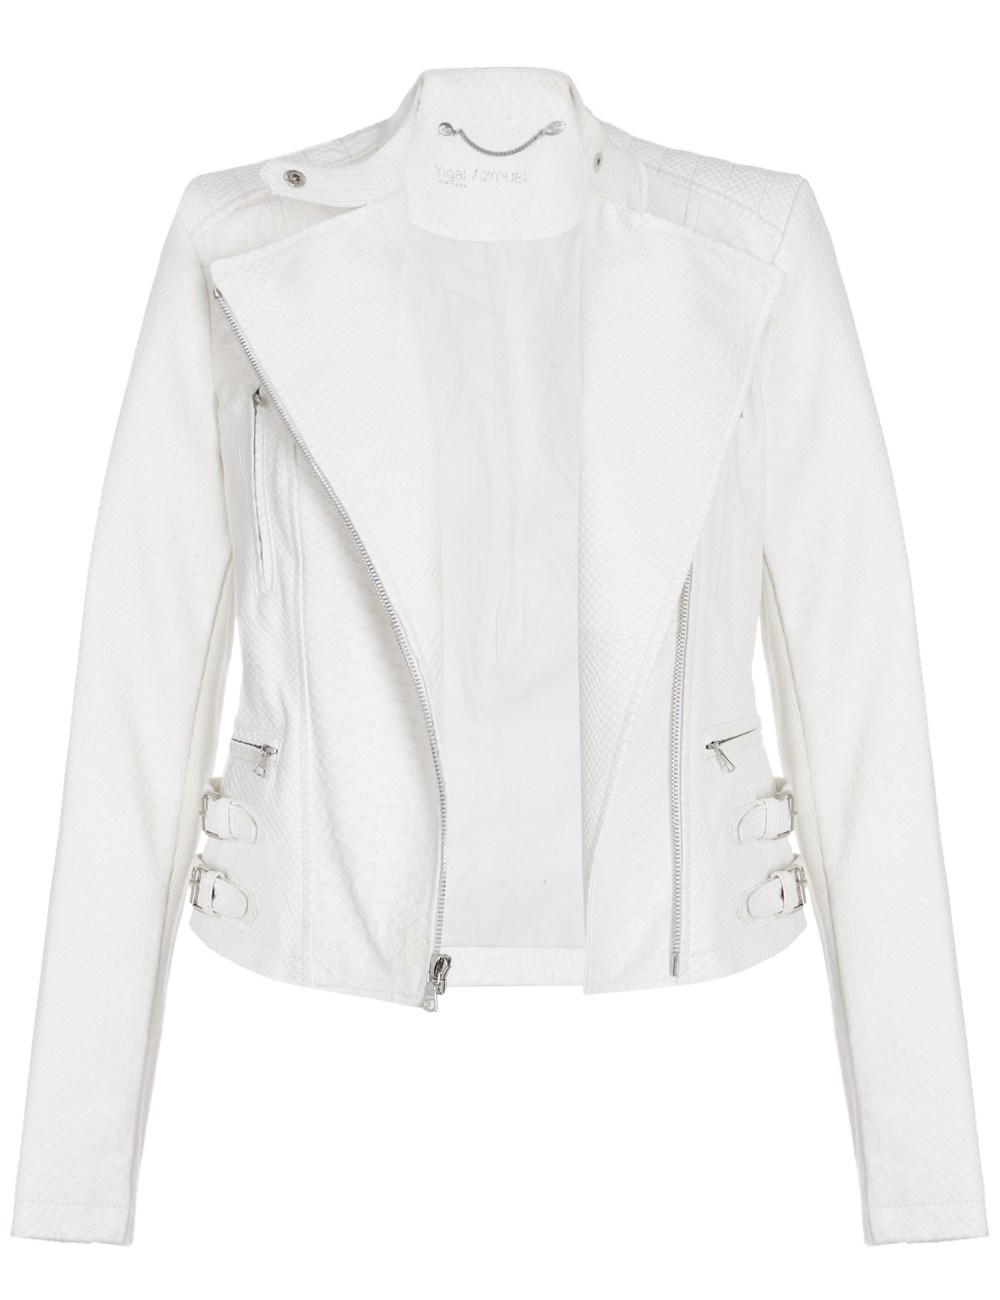 Yigal Azrouël Optic White Snake Leather Jacket in White | Lyst